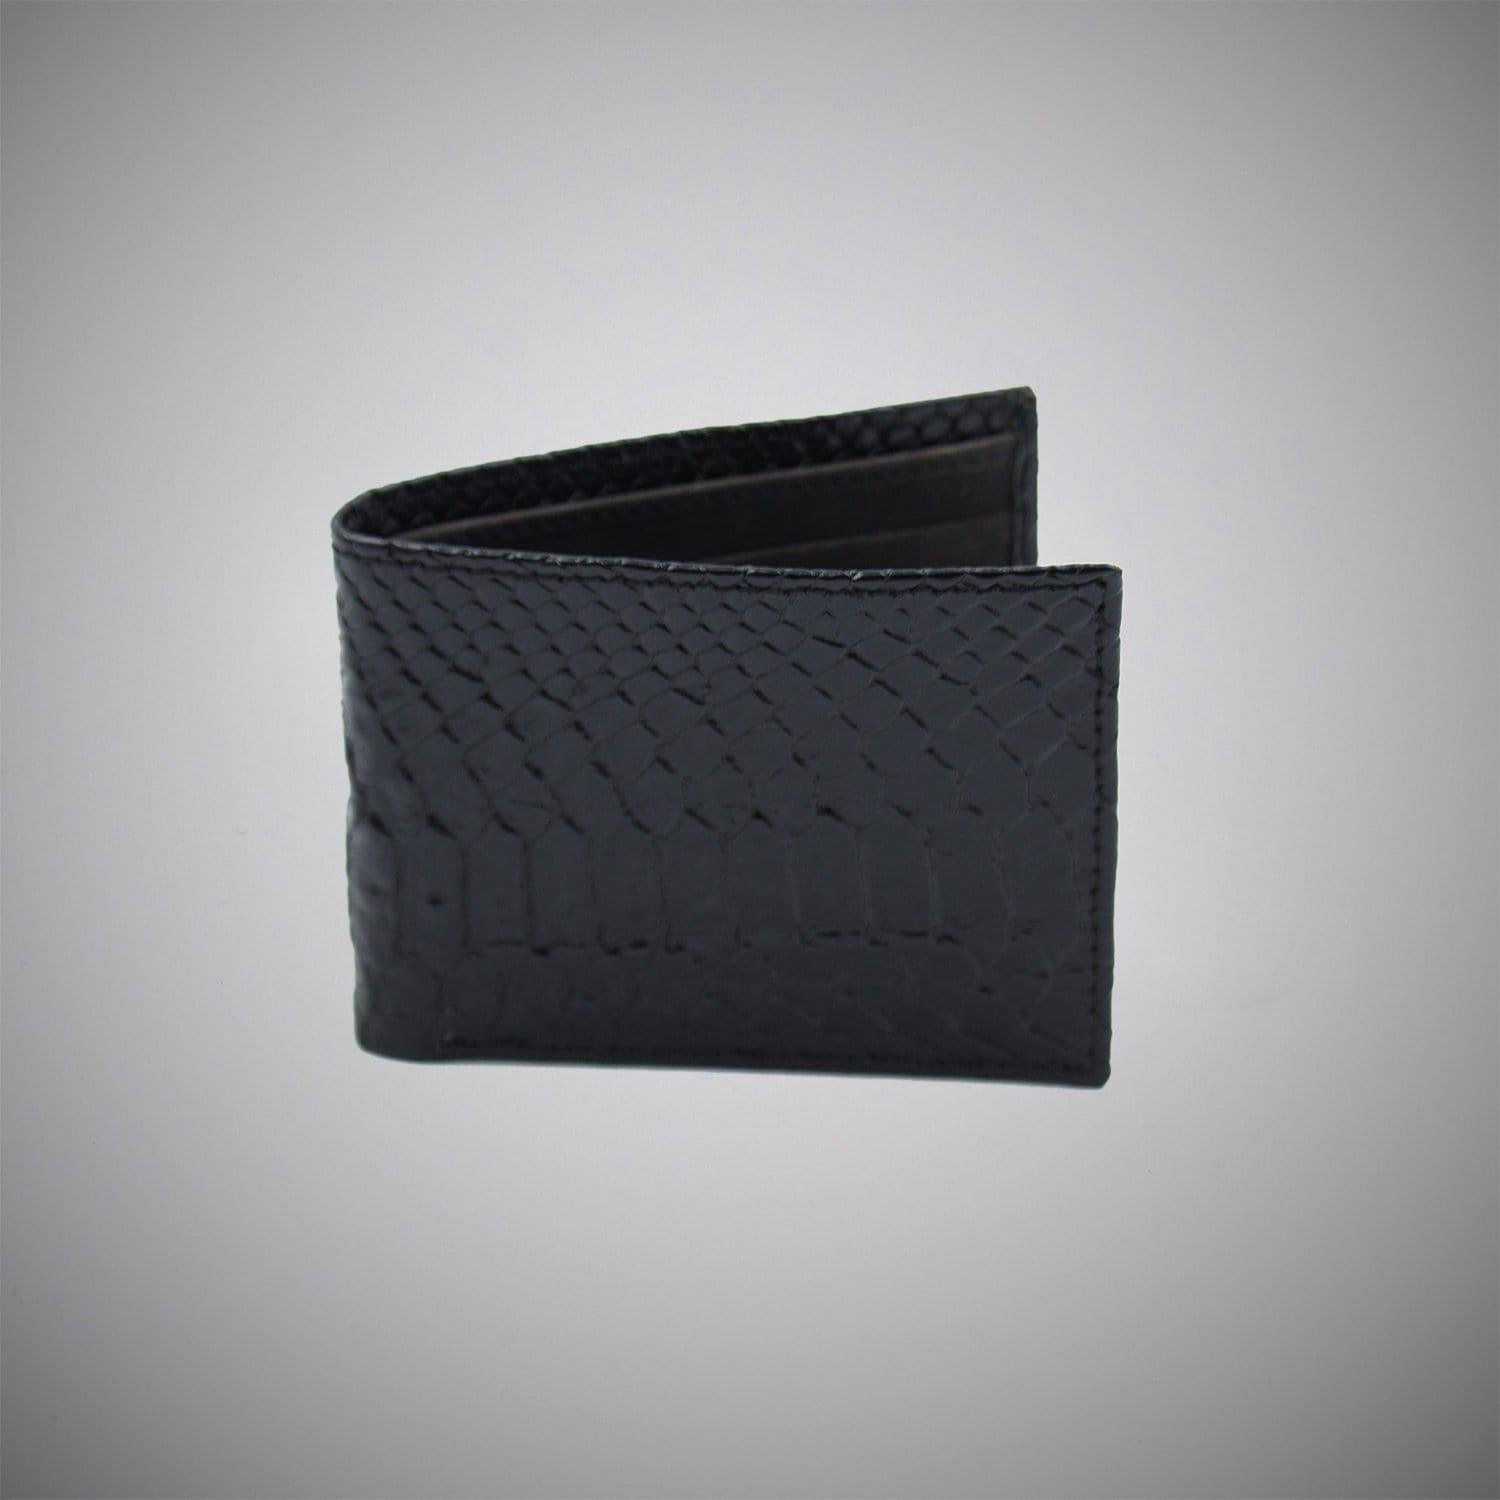 High Gloss Black Crocodile Skin Embossed Calf Leather Wallet With Black Suede Interior - Just White Shirts